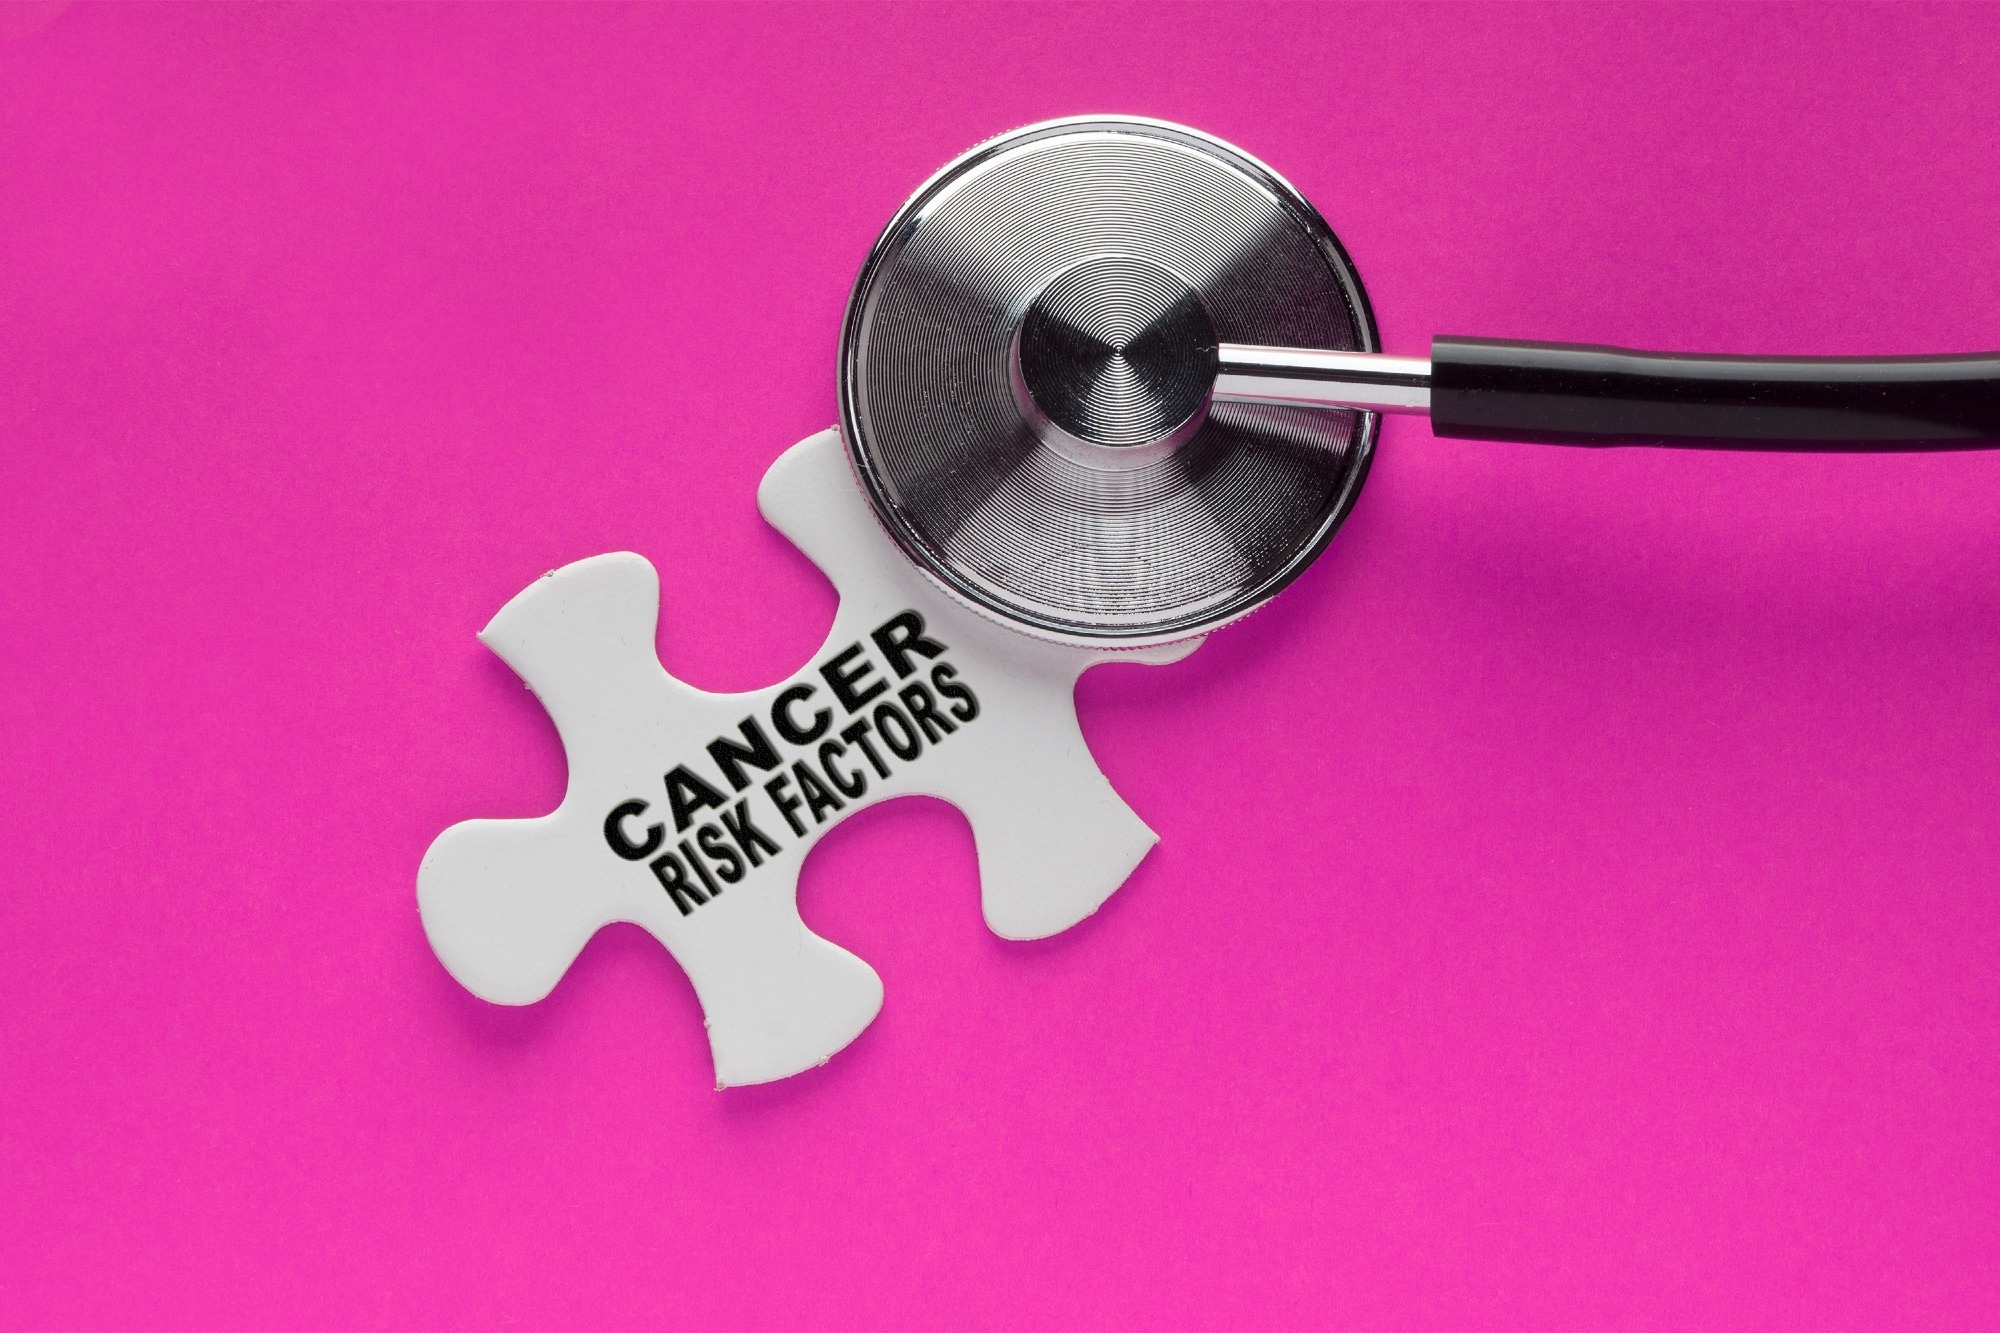 Study: Impact of risk factors on early cancer evolution. Image Credit: Shamleen/Shutterstock.com